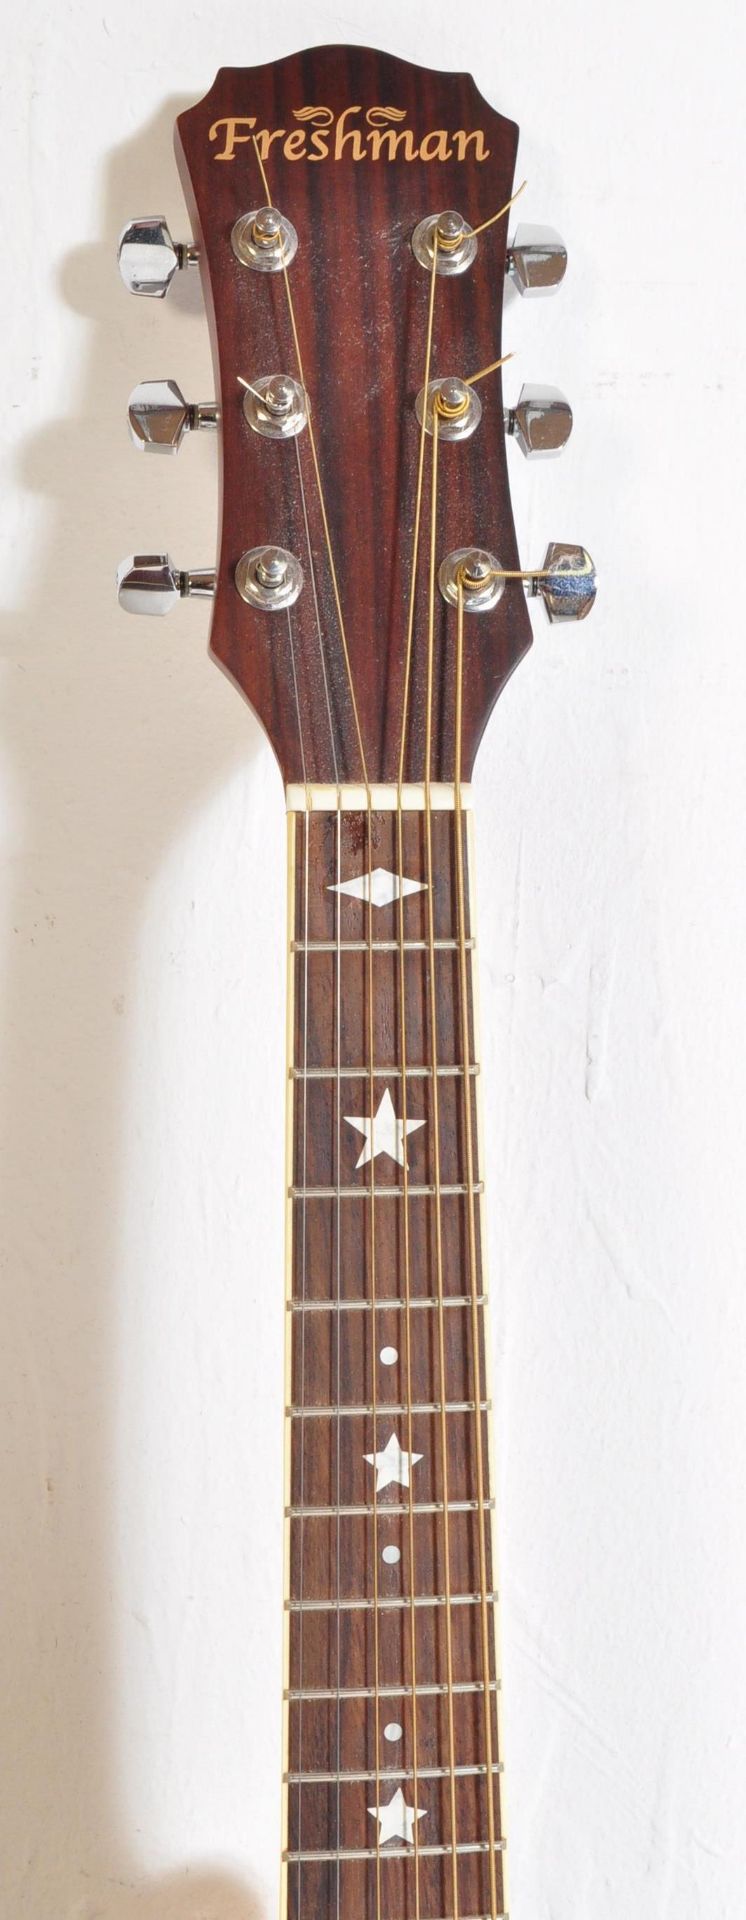 TWO RETRO VINTAGE ACOUSTIC GUITARS - Image 4 of 6